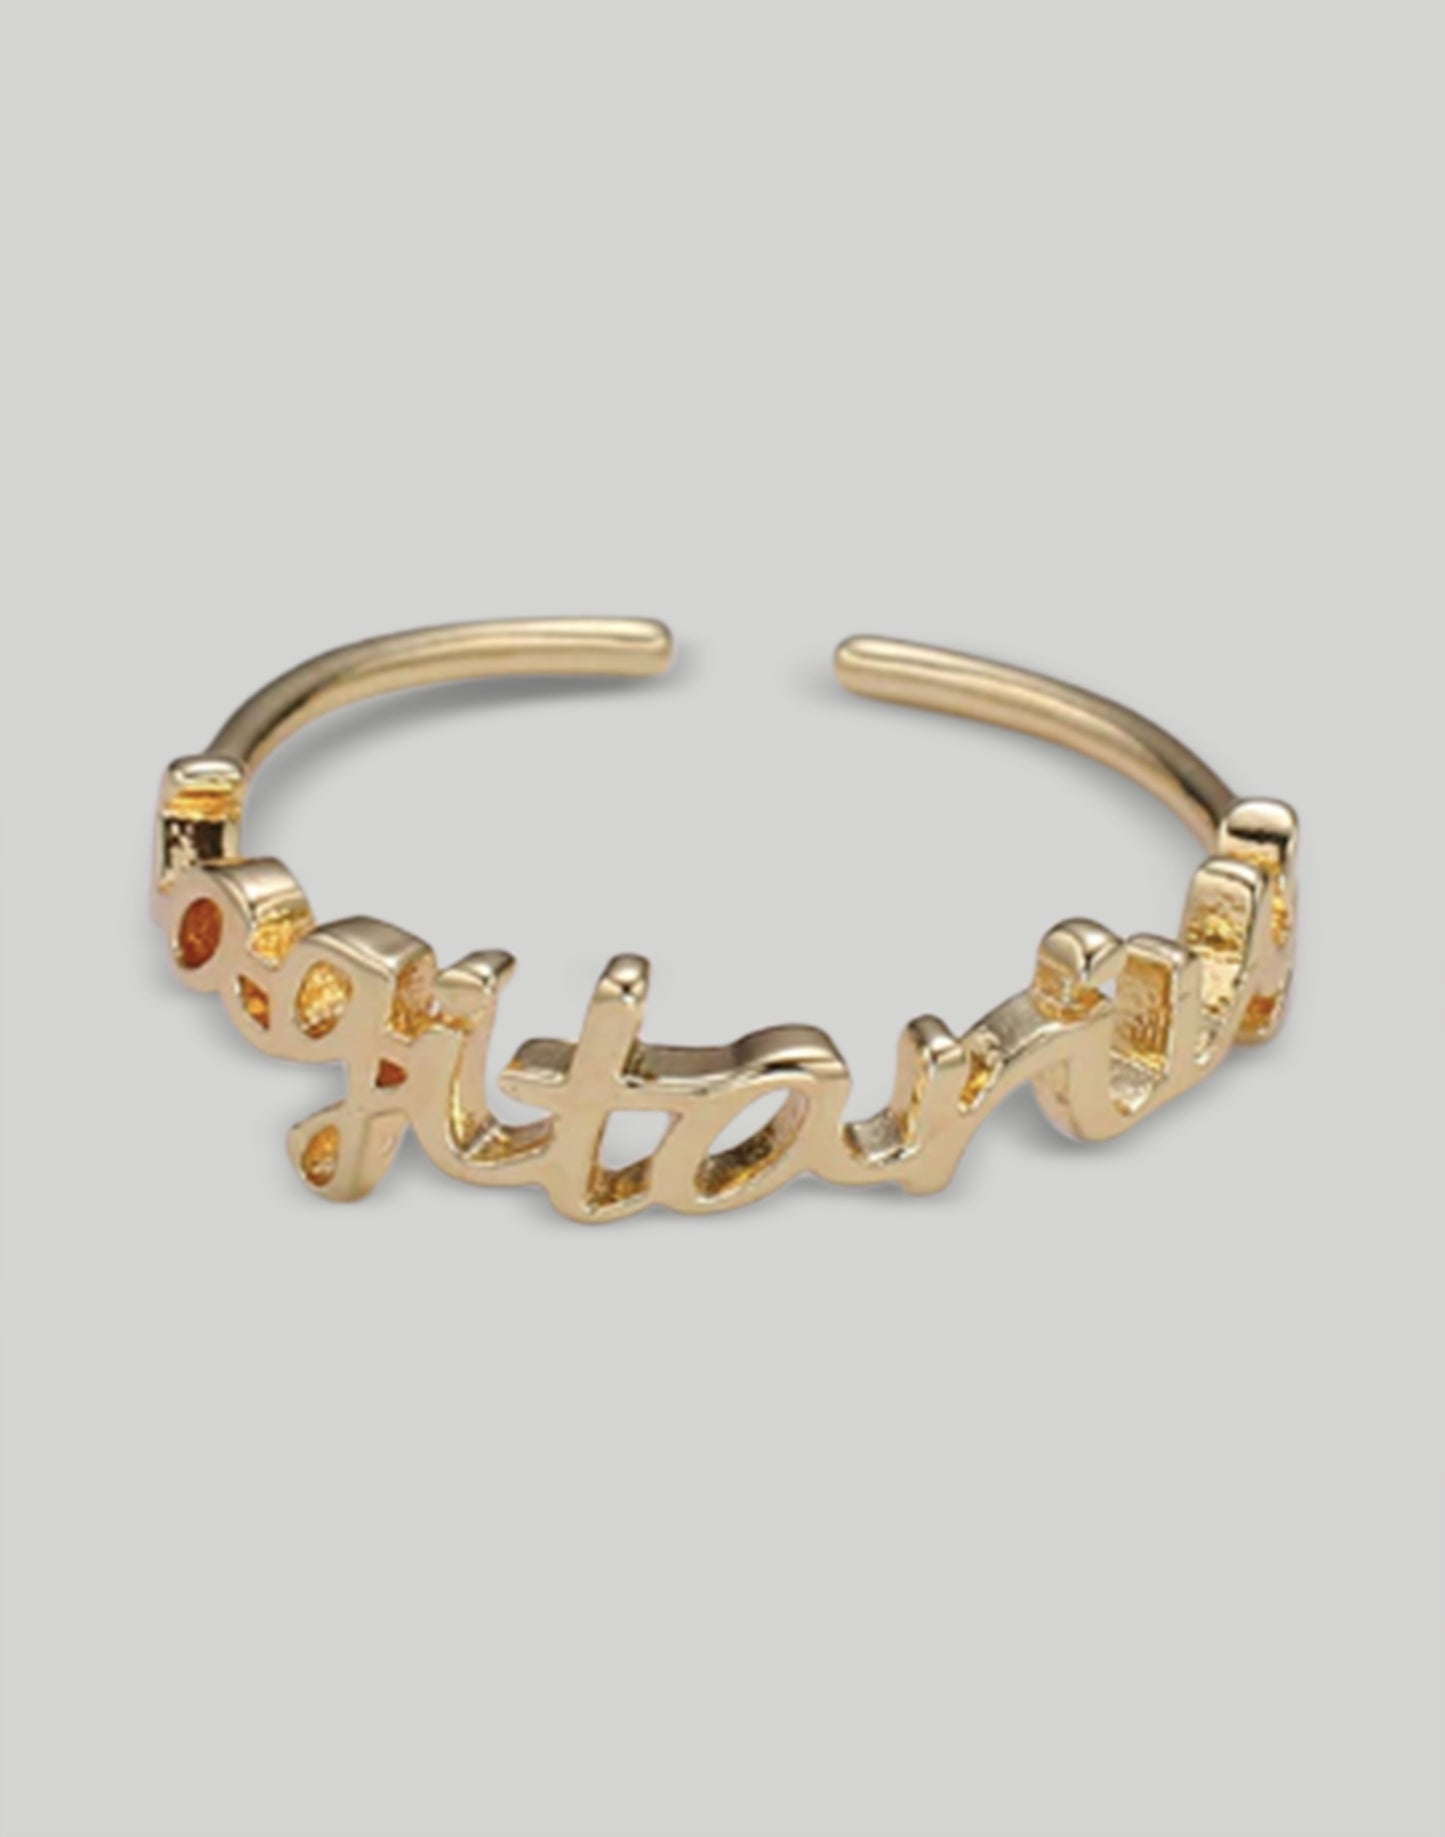 The Adjustable Zodiac Ring